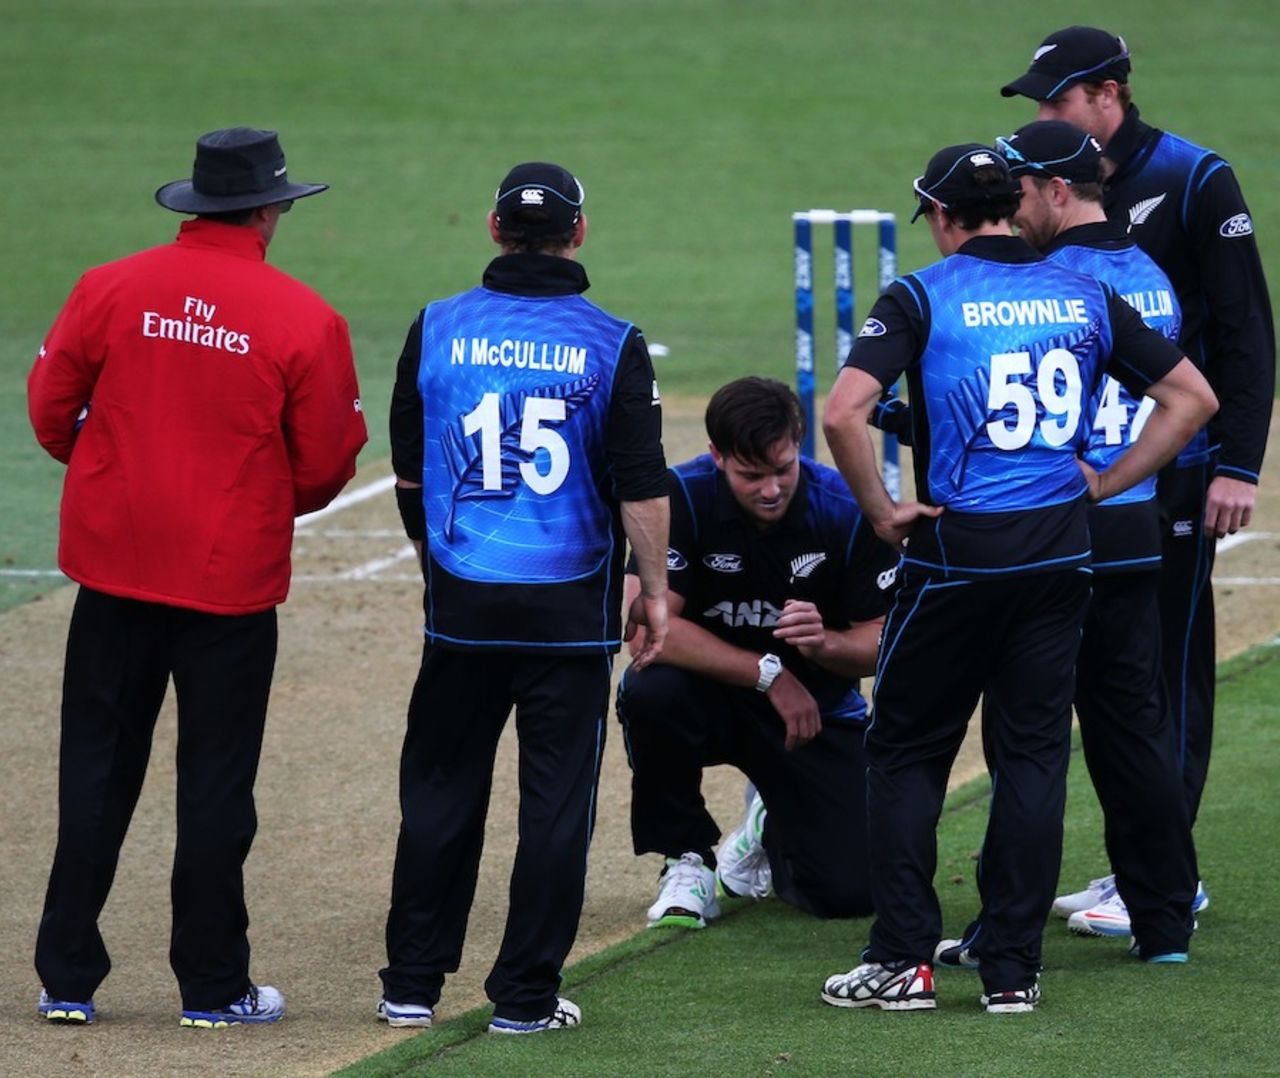 Mitchell McClenaghan nurses a sore finger after hitting the stumps while bowling, New Zealand v South Africa, 3rd ODI, Hamilton, October 27, 2014